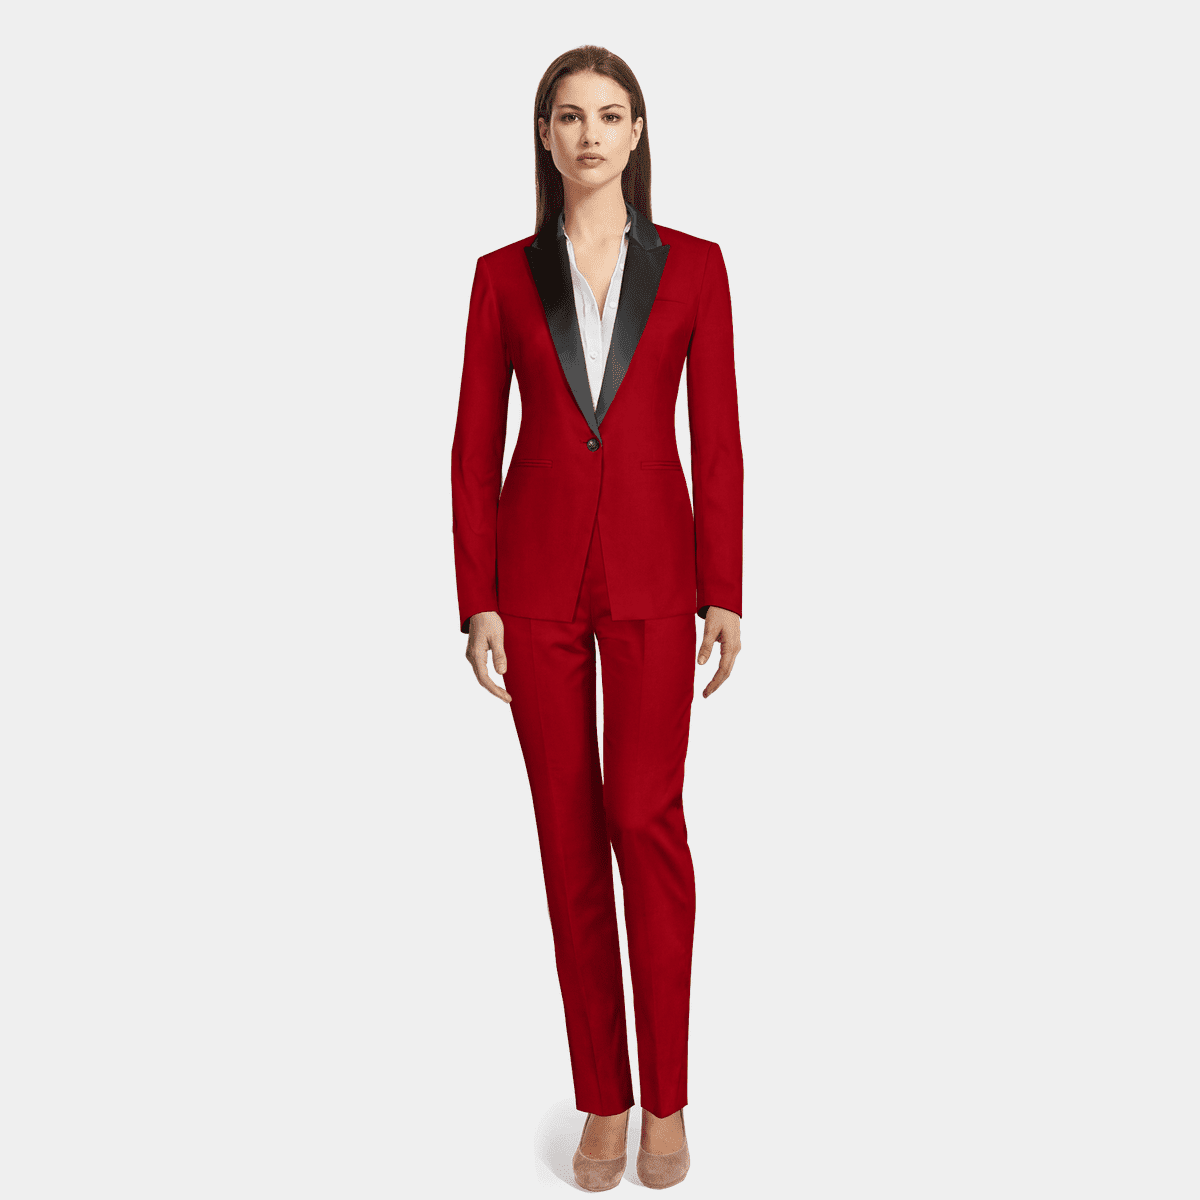 Red Suits for Women - Sumissura